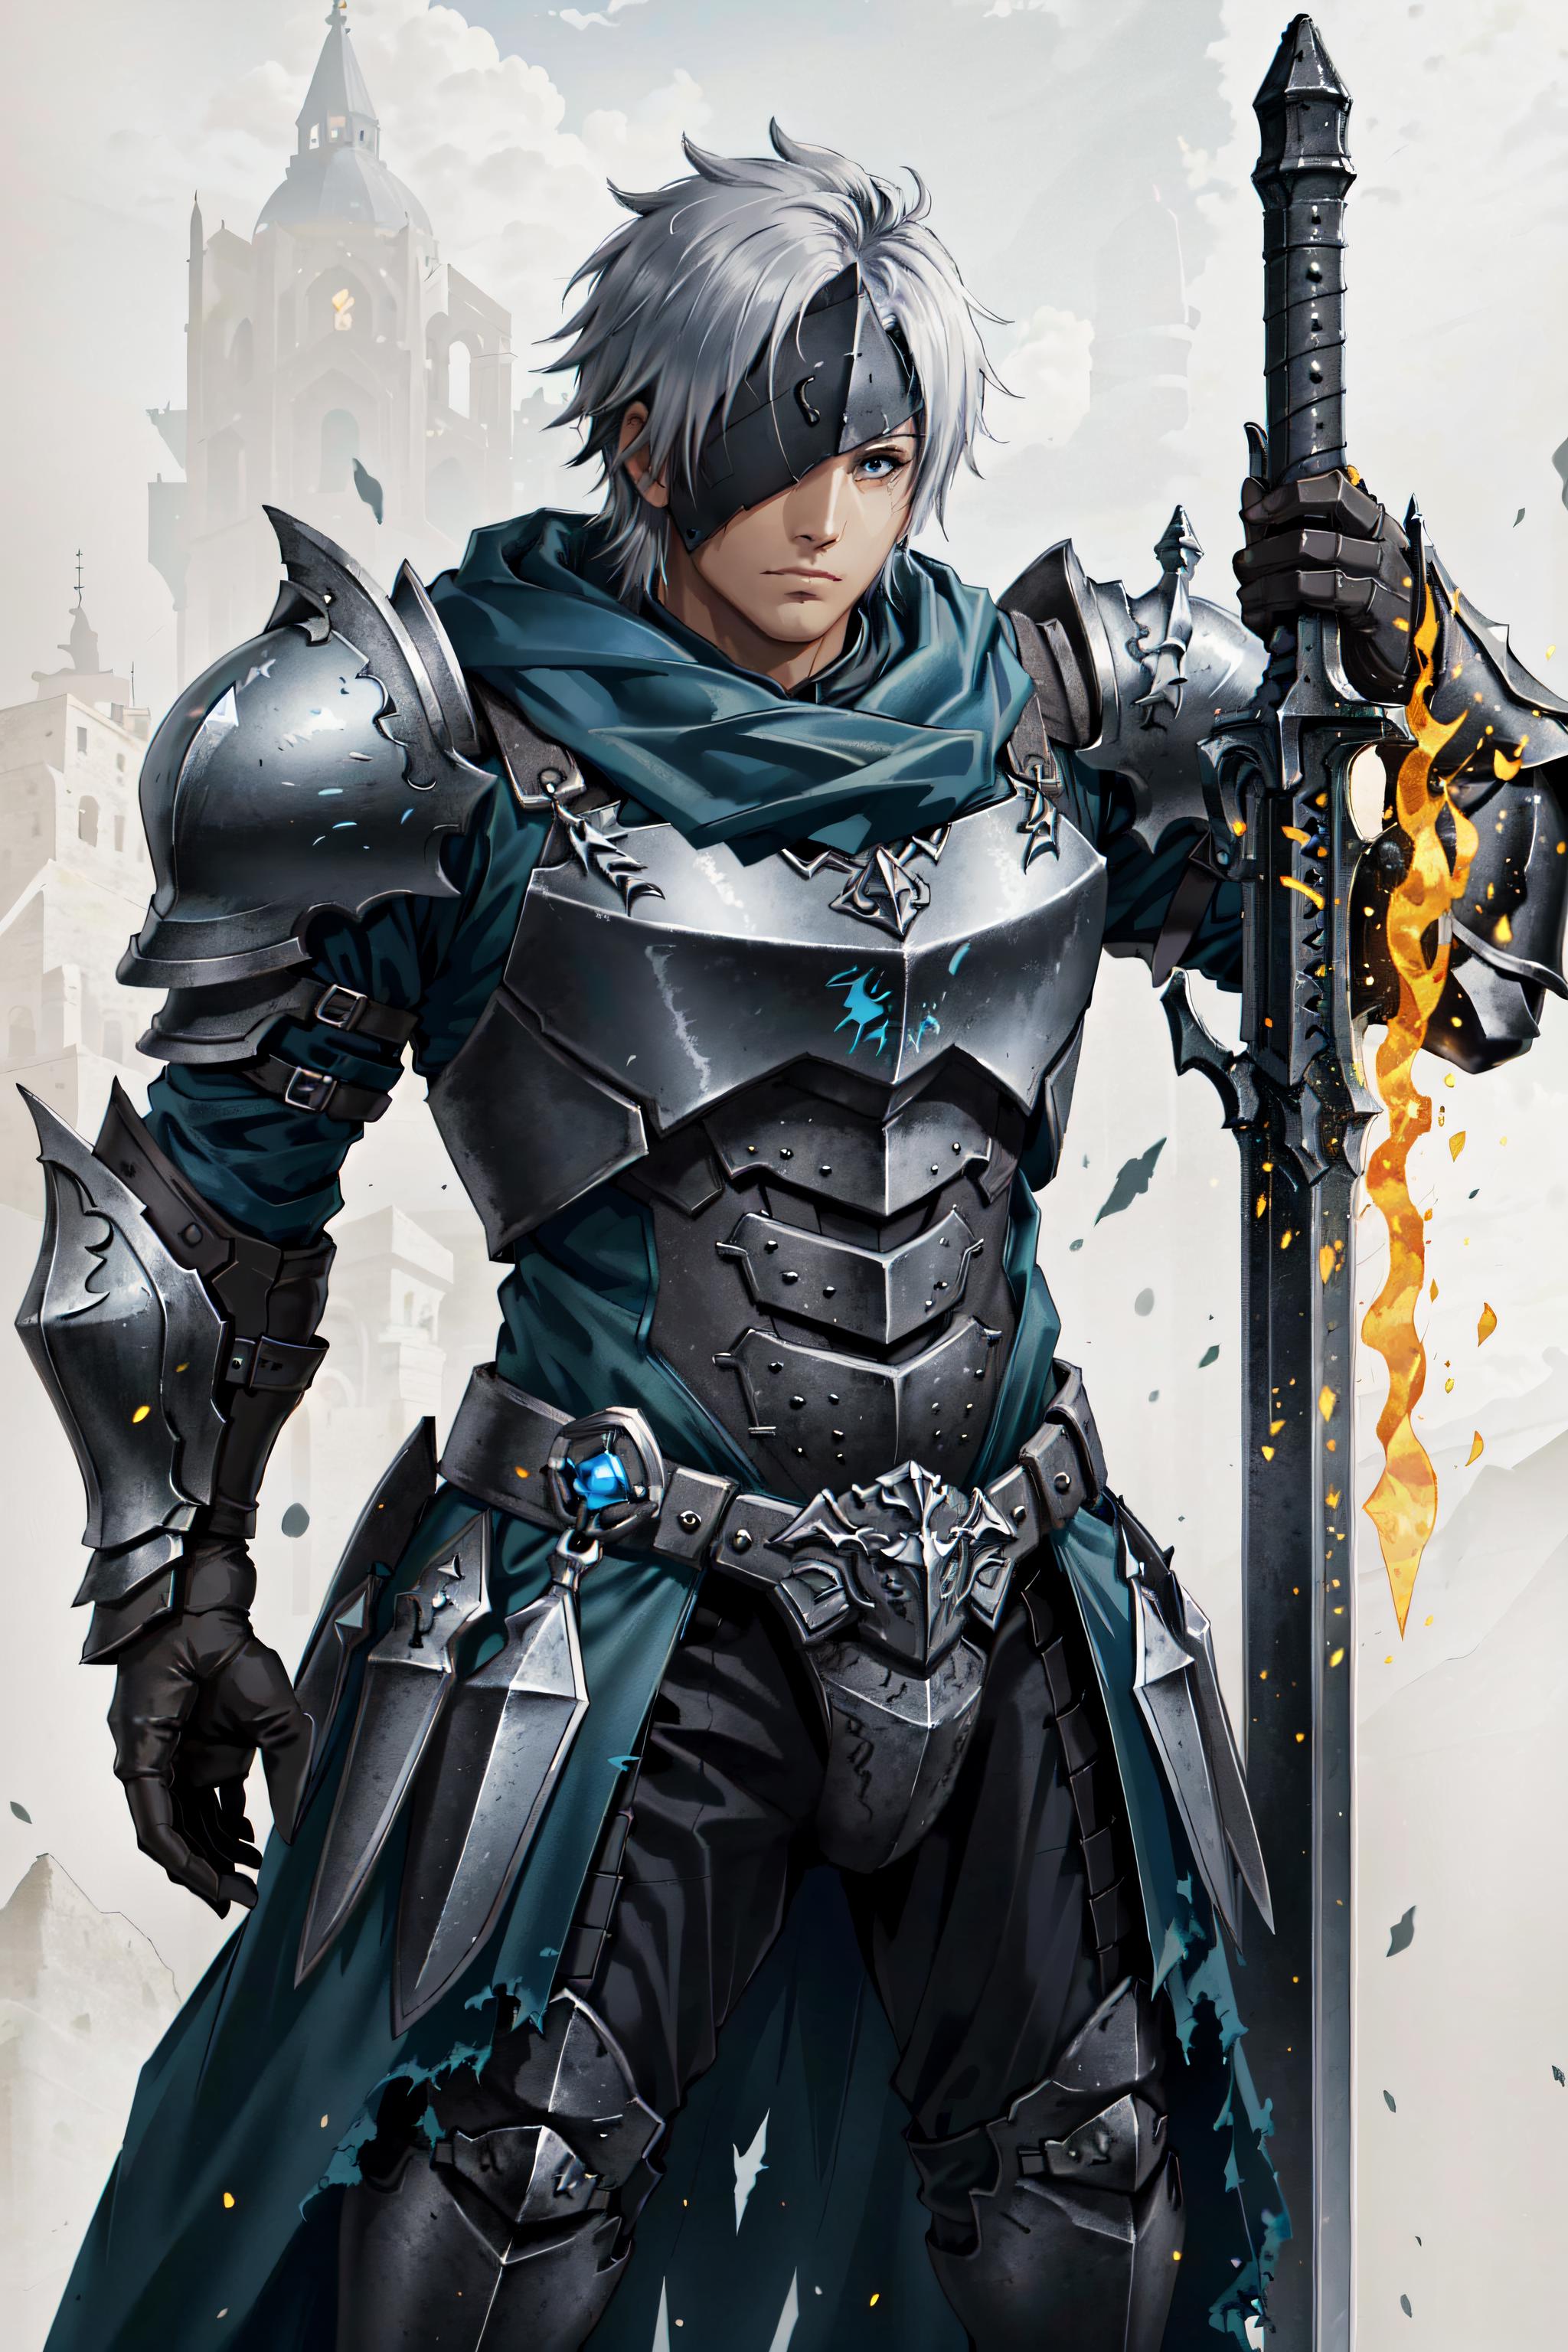 Lexica - Anime style boy black hair, deep focus, medieval knight cloths,  holding black sword with neon red dots, eary mood, scary, Chinese style  arch...